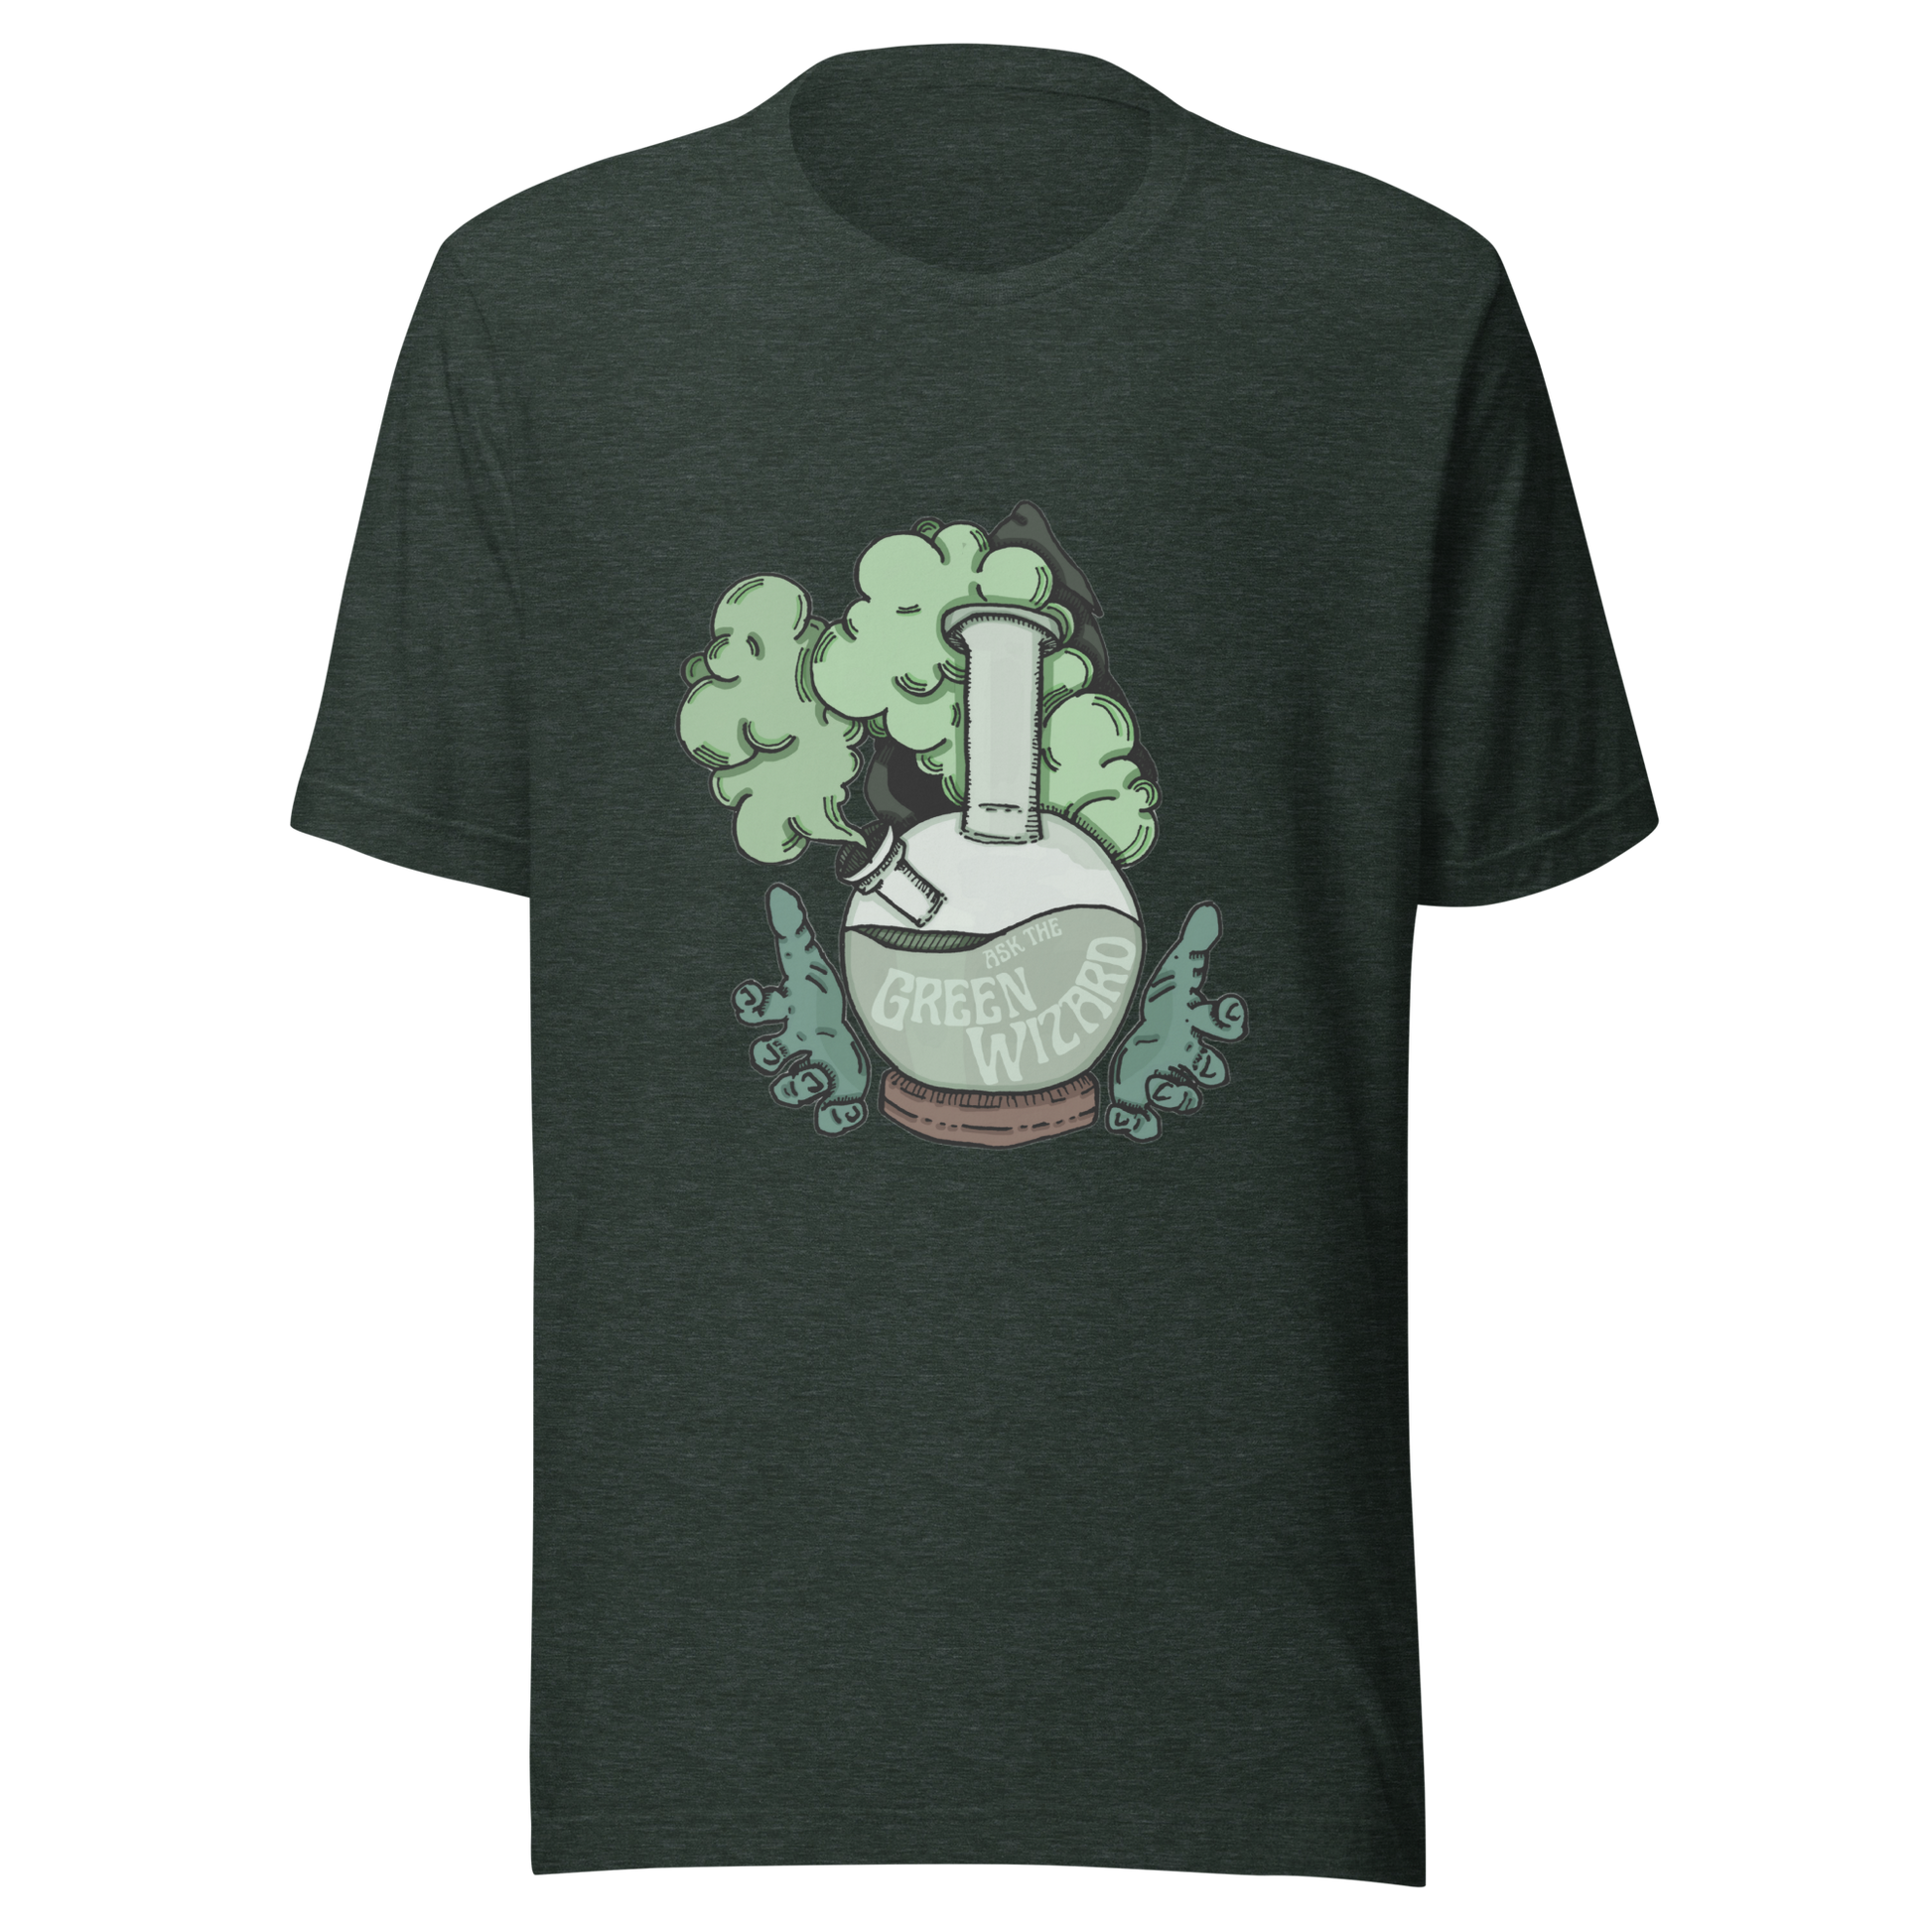 ask the green wizard t-shirt in forest - gaslit apparel